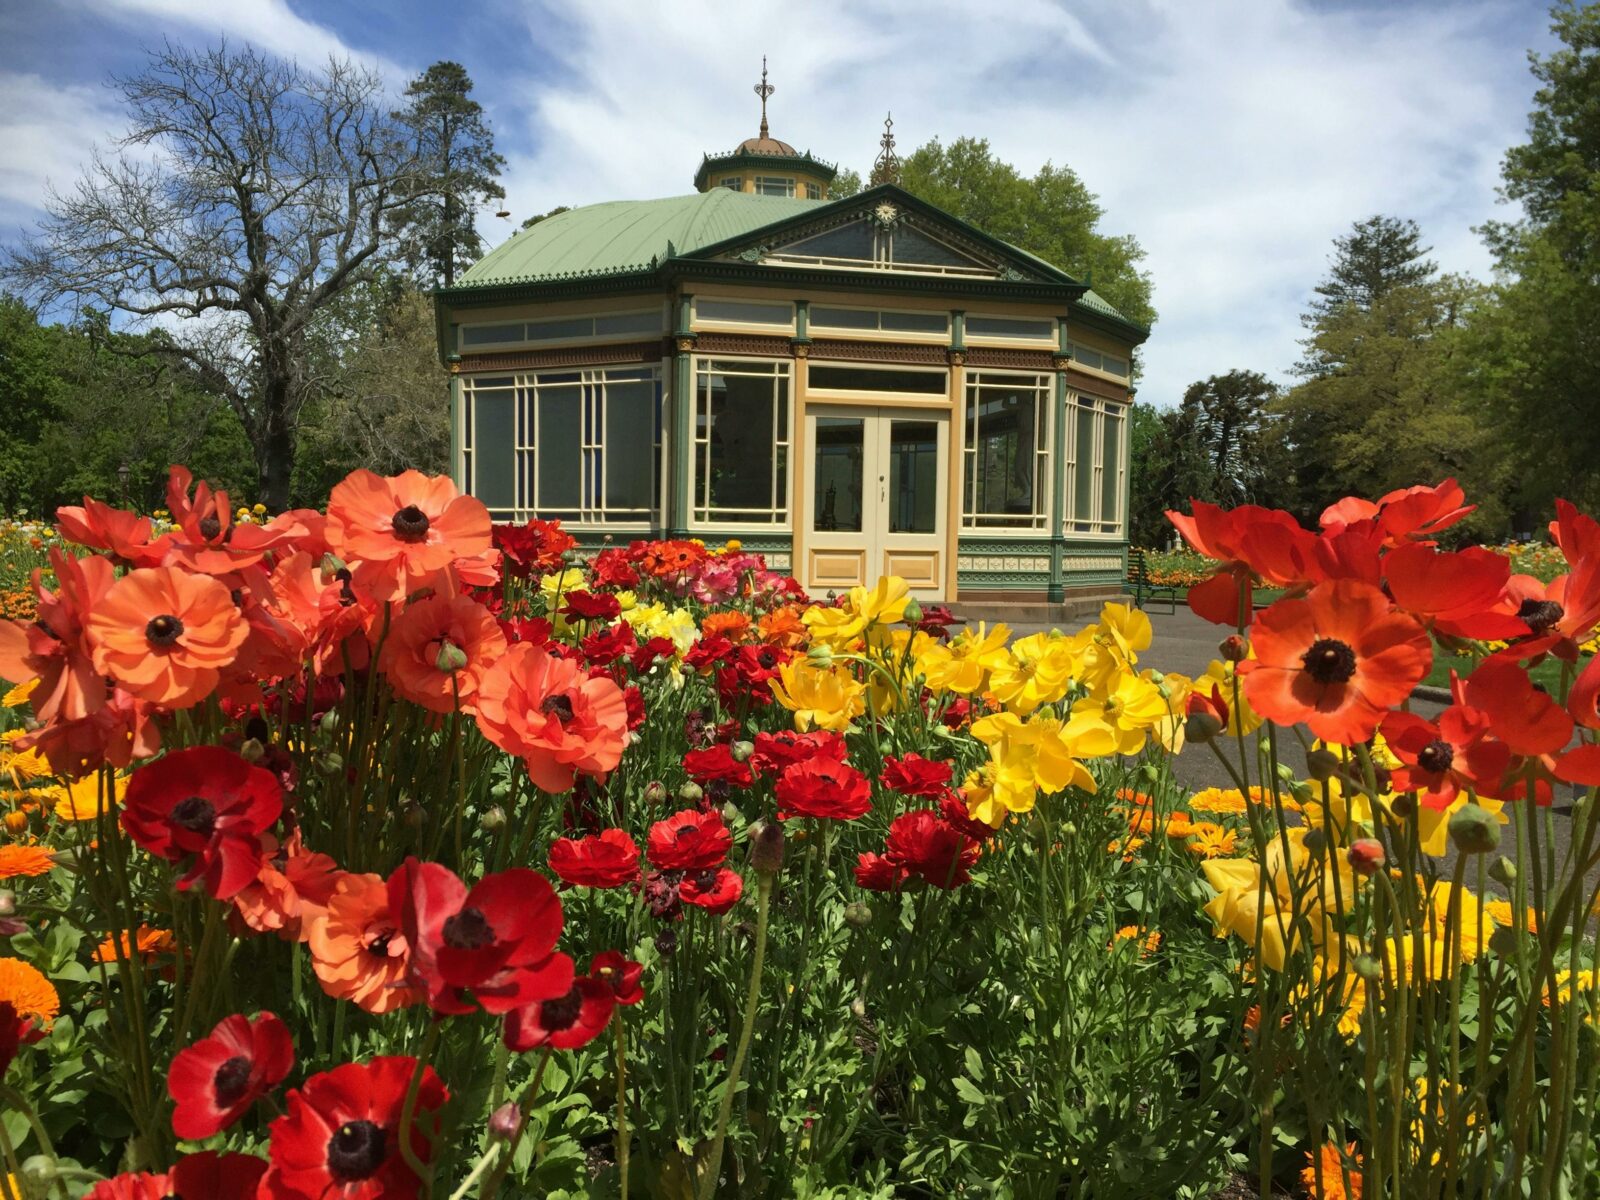 The statue pavilion sits behind a flower bed with yellow, red and orange flowers